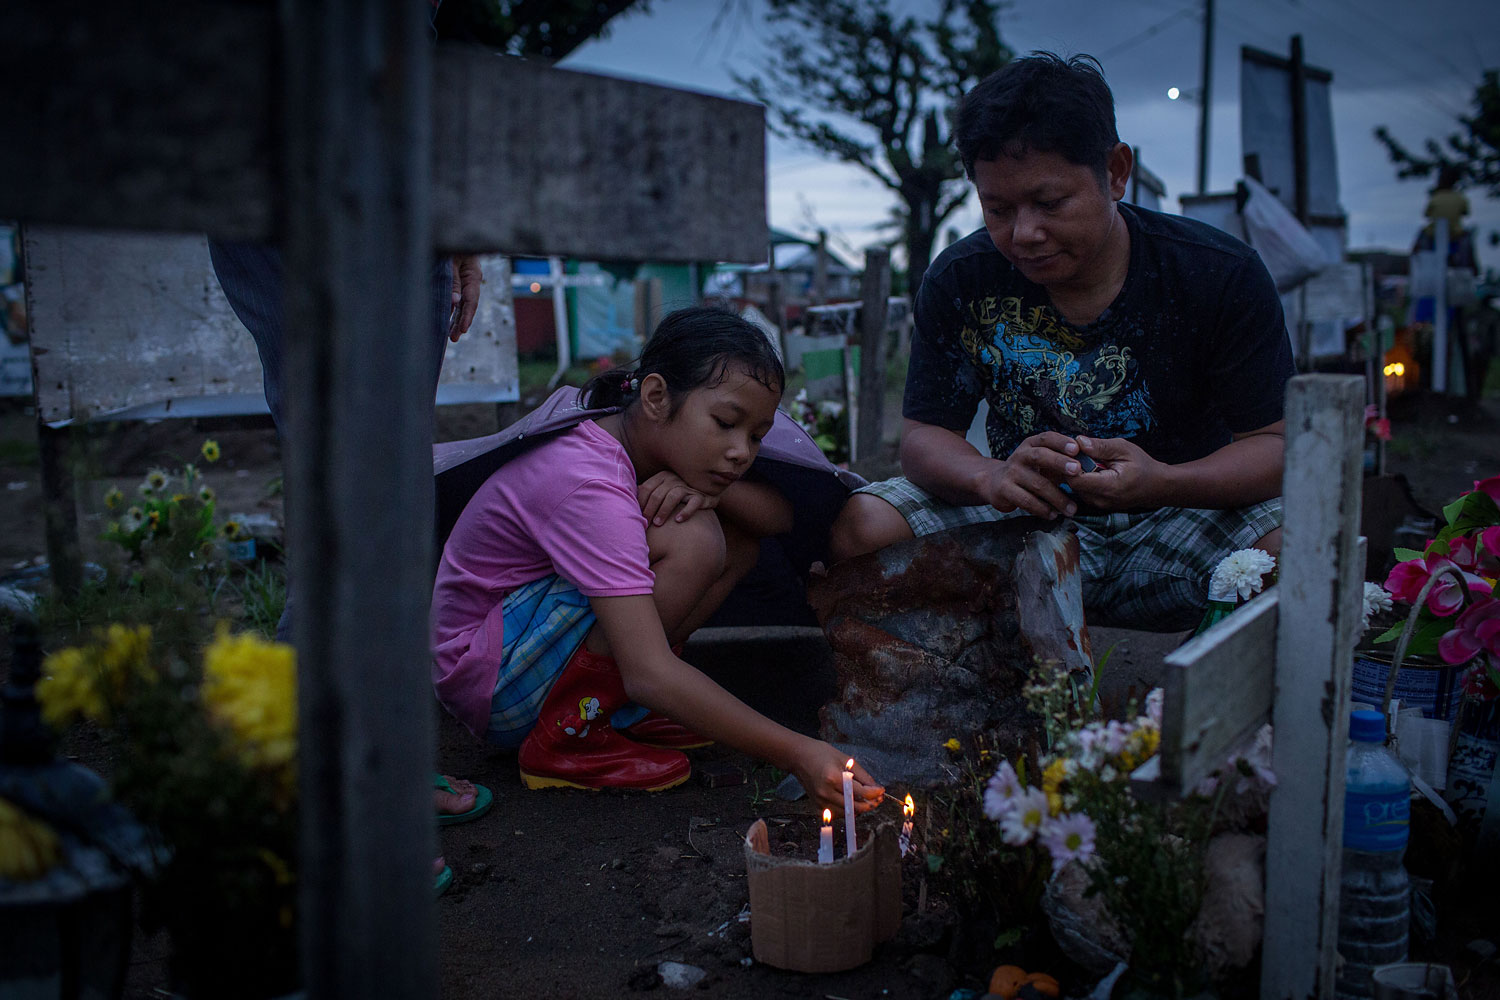 Jonna Lizette C. Modesto lights candles at the gravesite of her 5-year old brother John Reyneud C. Modesto watched on by her father Anastacio S. Modesto III at the makeshift mass grave site at San Joaquin Parish on April 16, 2014 in Tacloban.